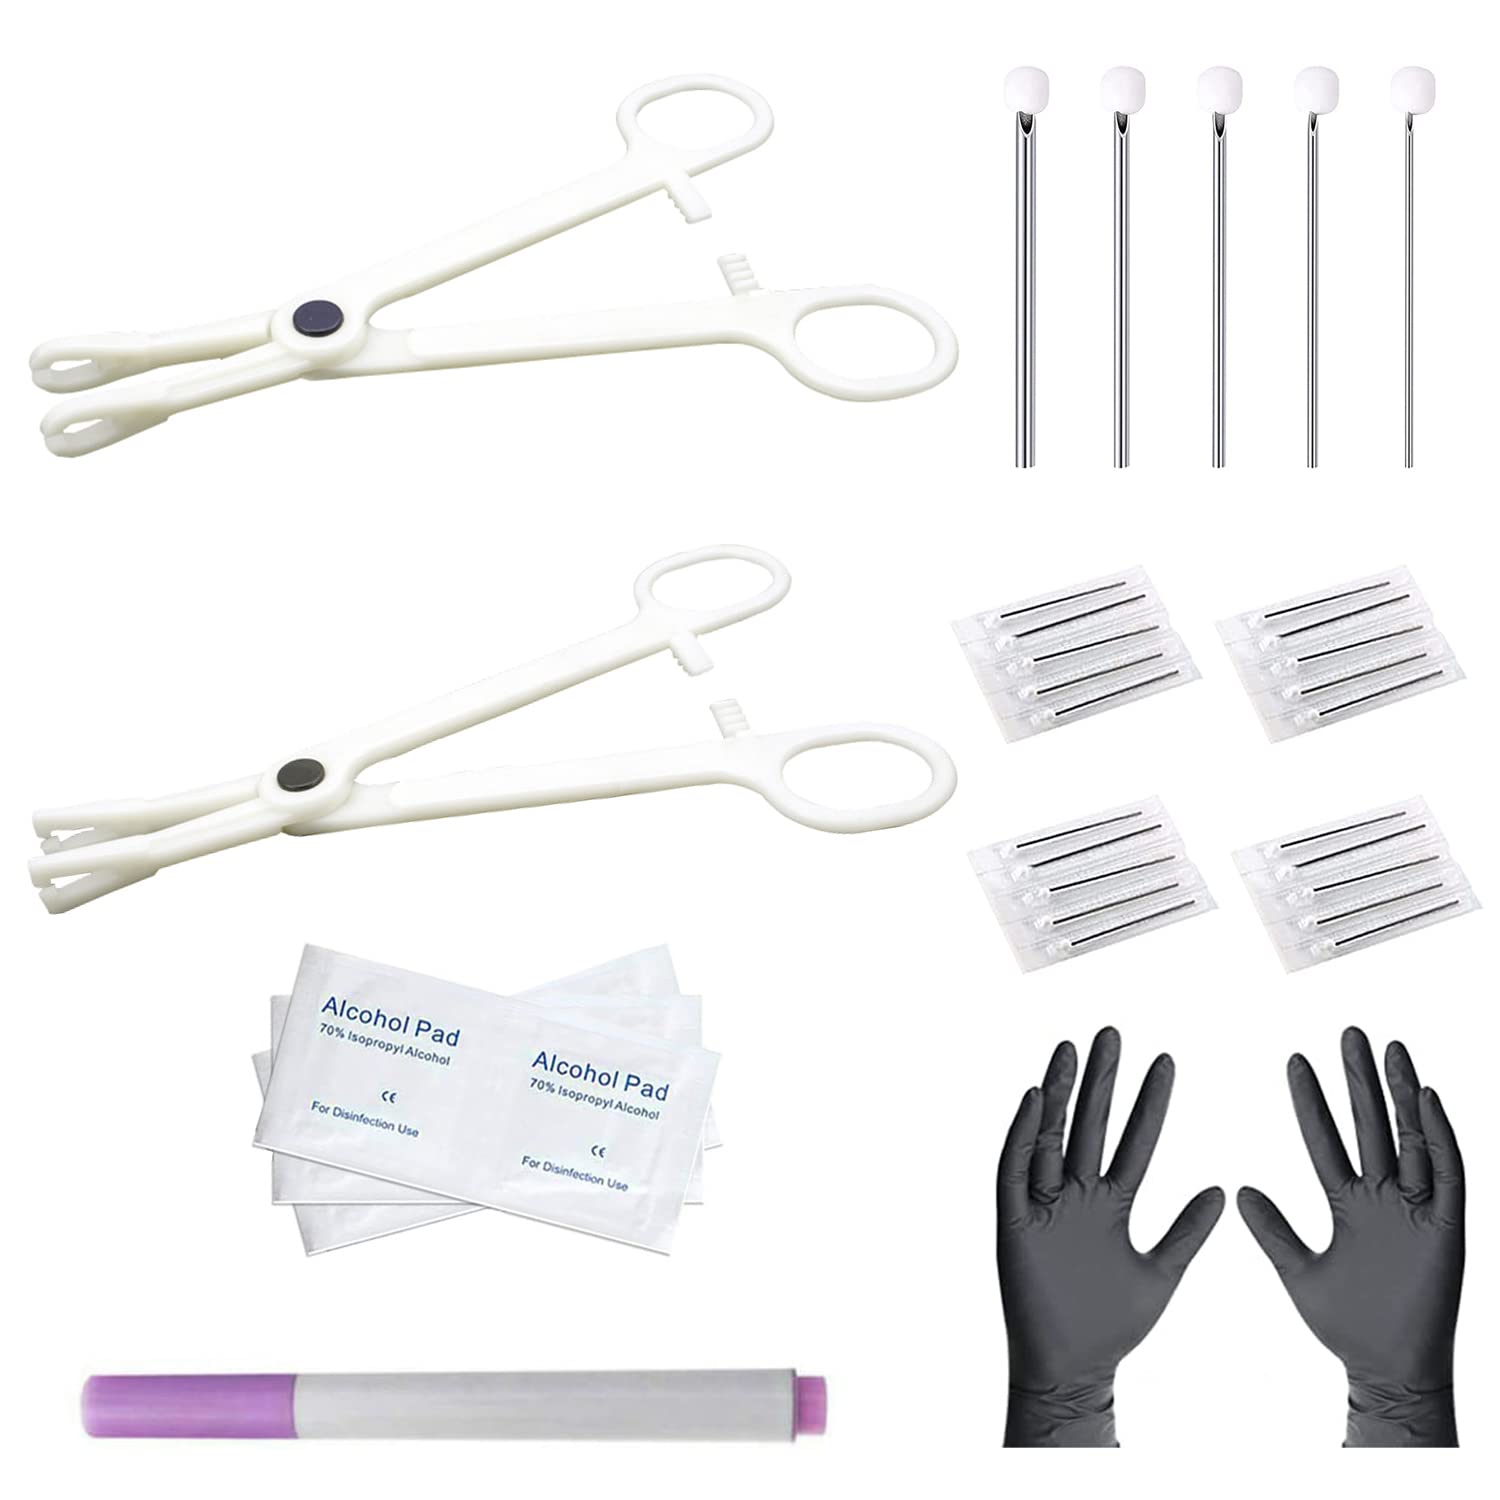 NA Ear Nose Piercing Needles Body Piercing Needles Kit Mix Size 12G 14G 16G 18G 20G Stainless Steel Piercing Kit with 2 Pcs Different Piercing Clamps and Alcohol Pads, Marker Pen